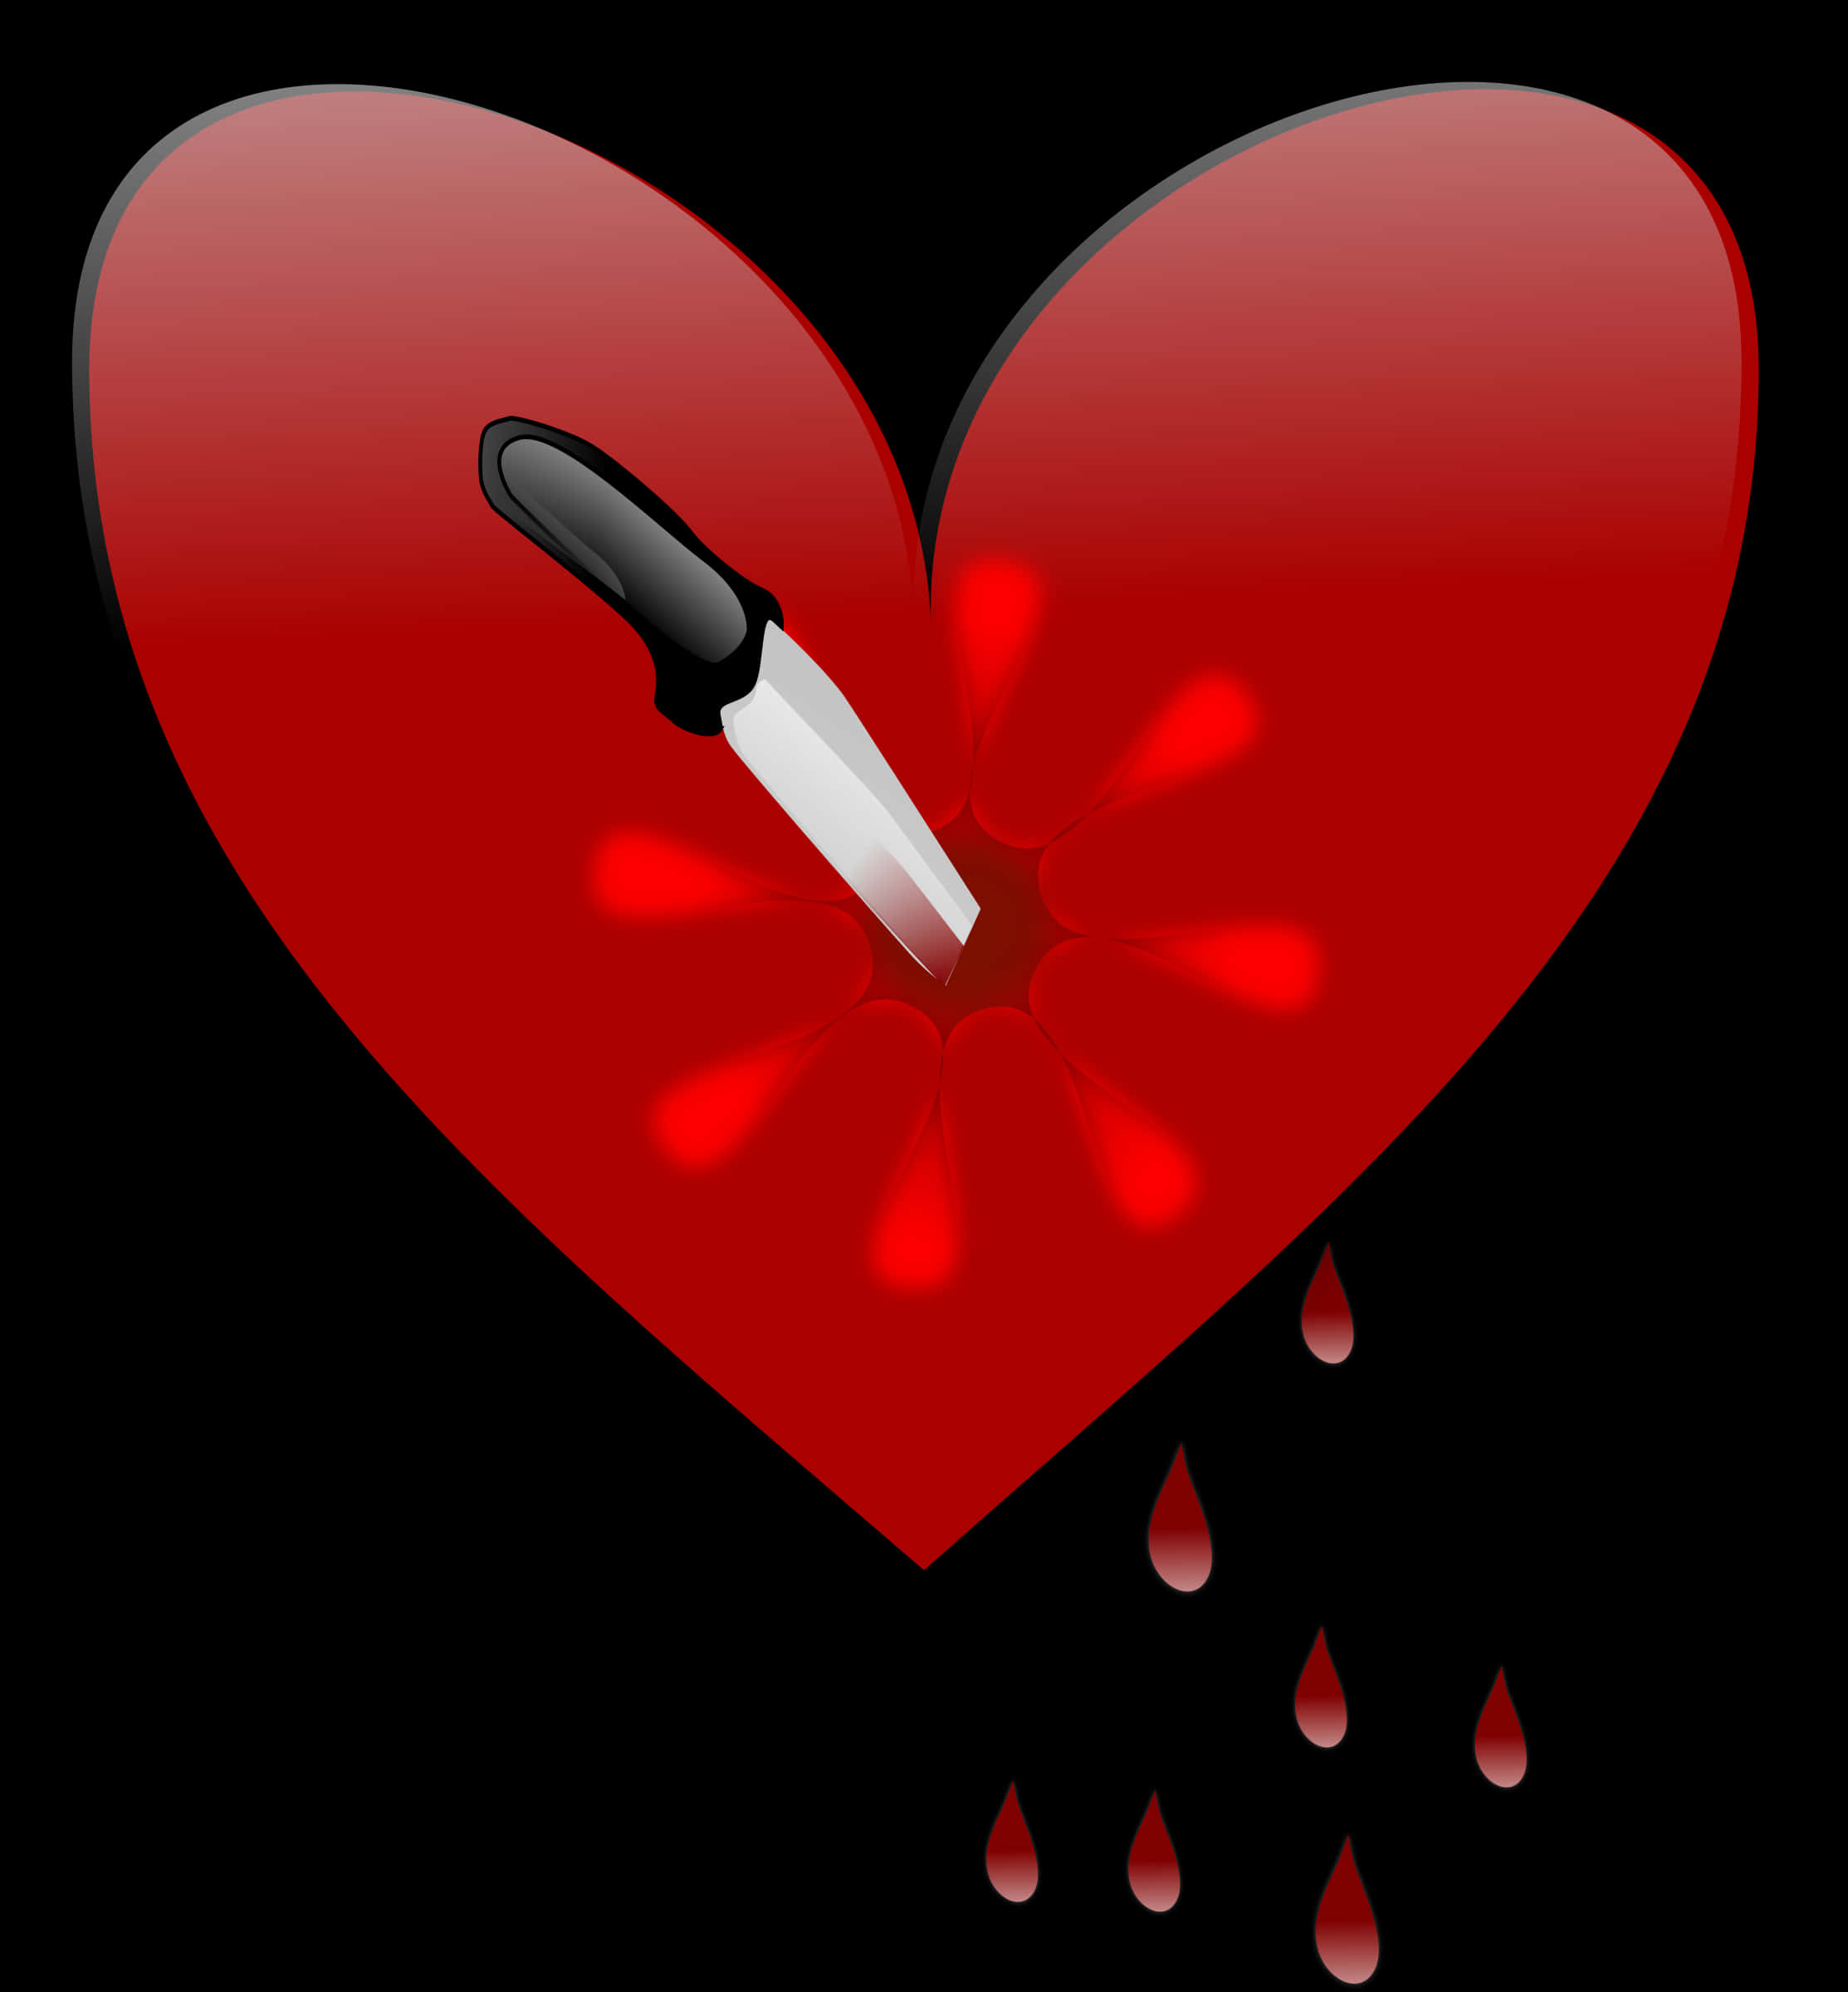 Broken Heartwith Knifeand Drops PNG image